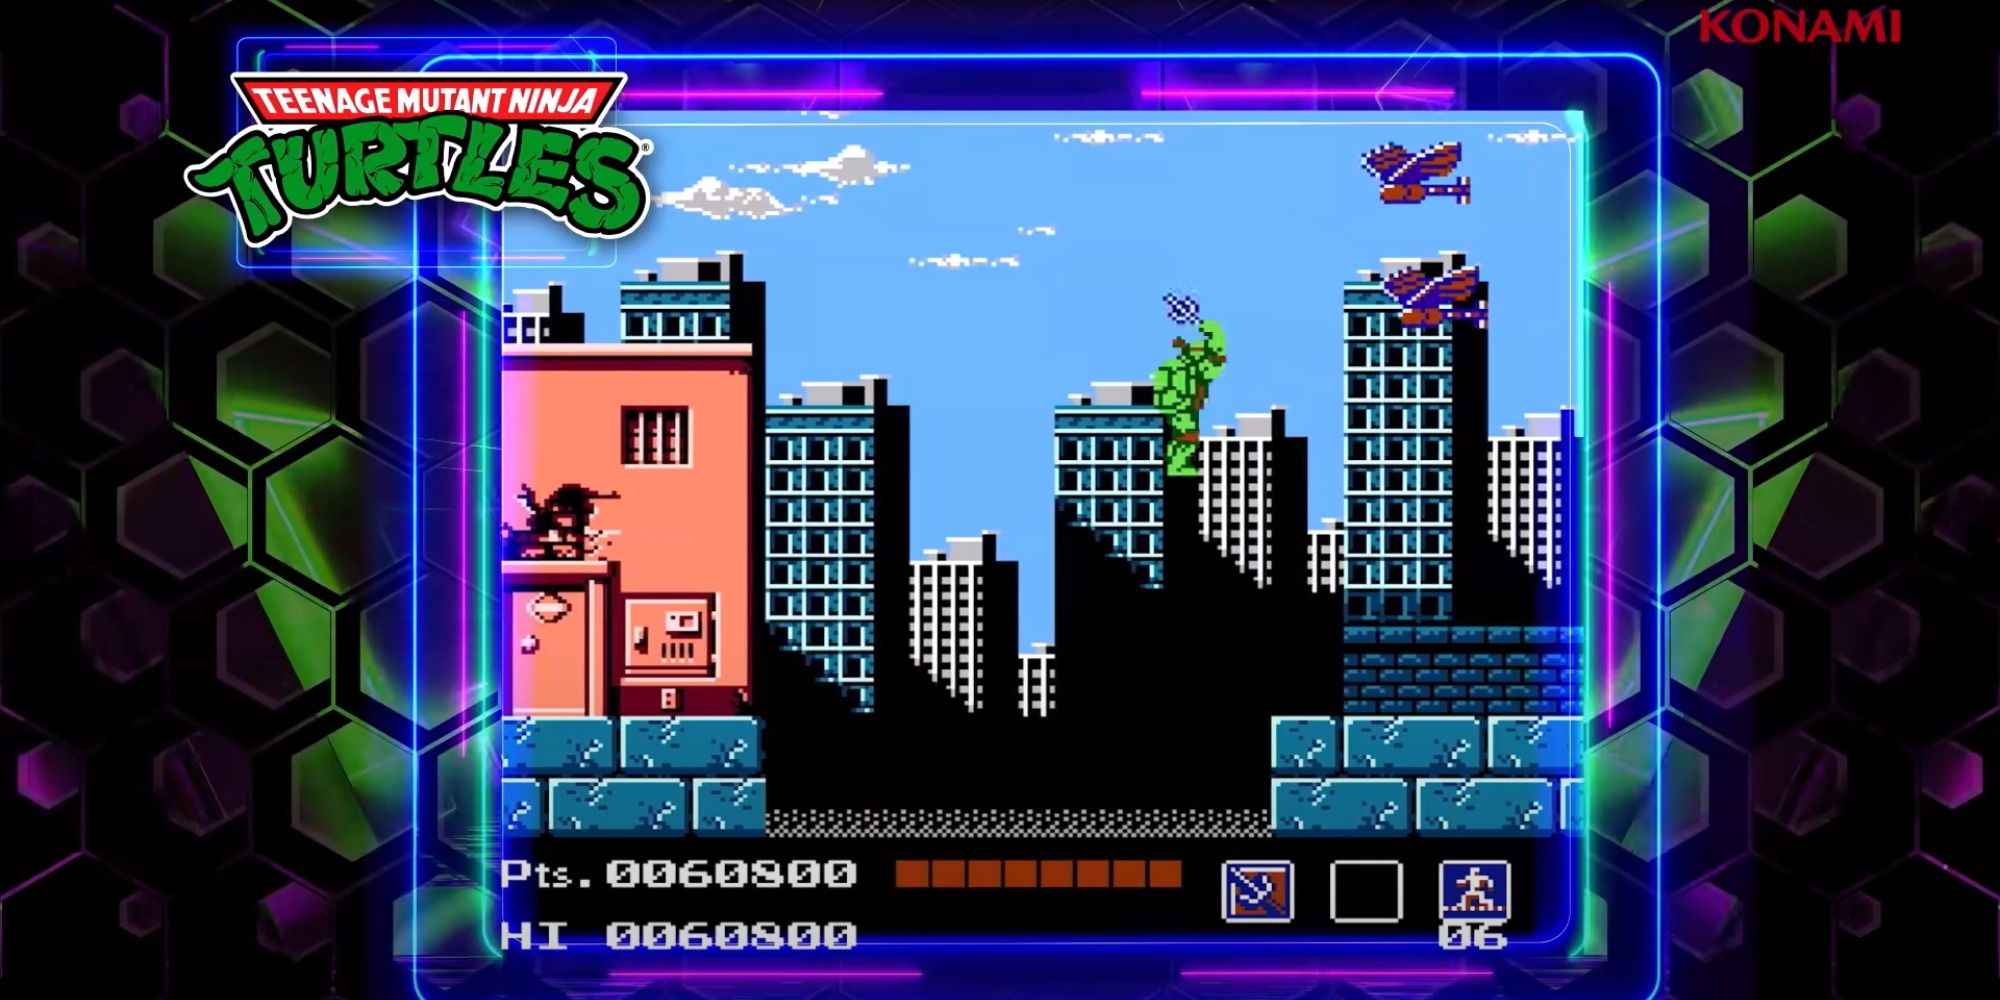 TMNT (NES) footage via announcement trailer with gameplay centered